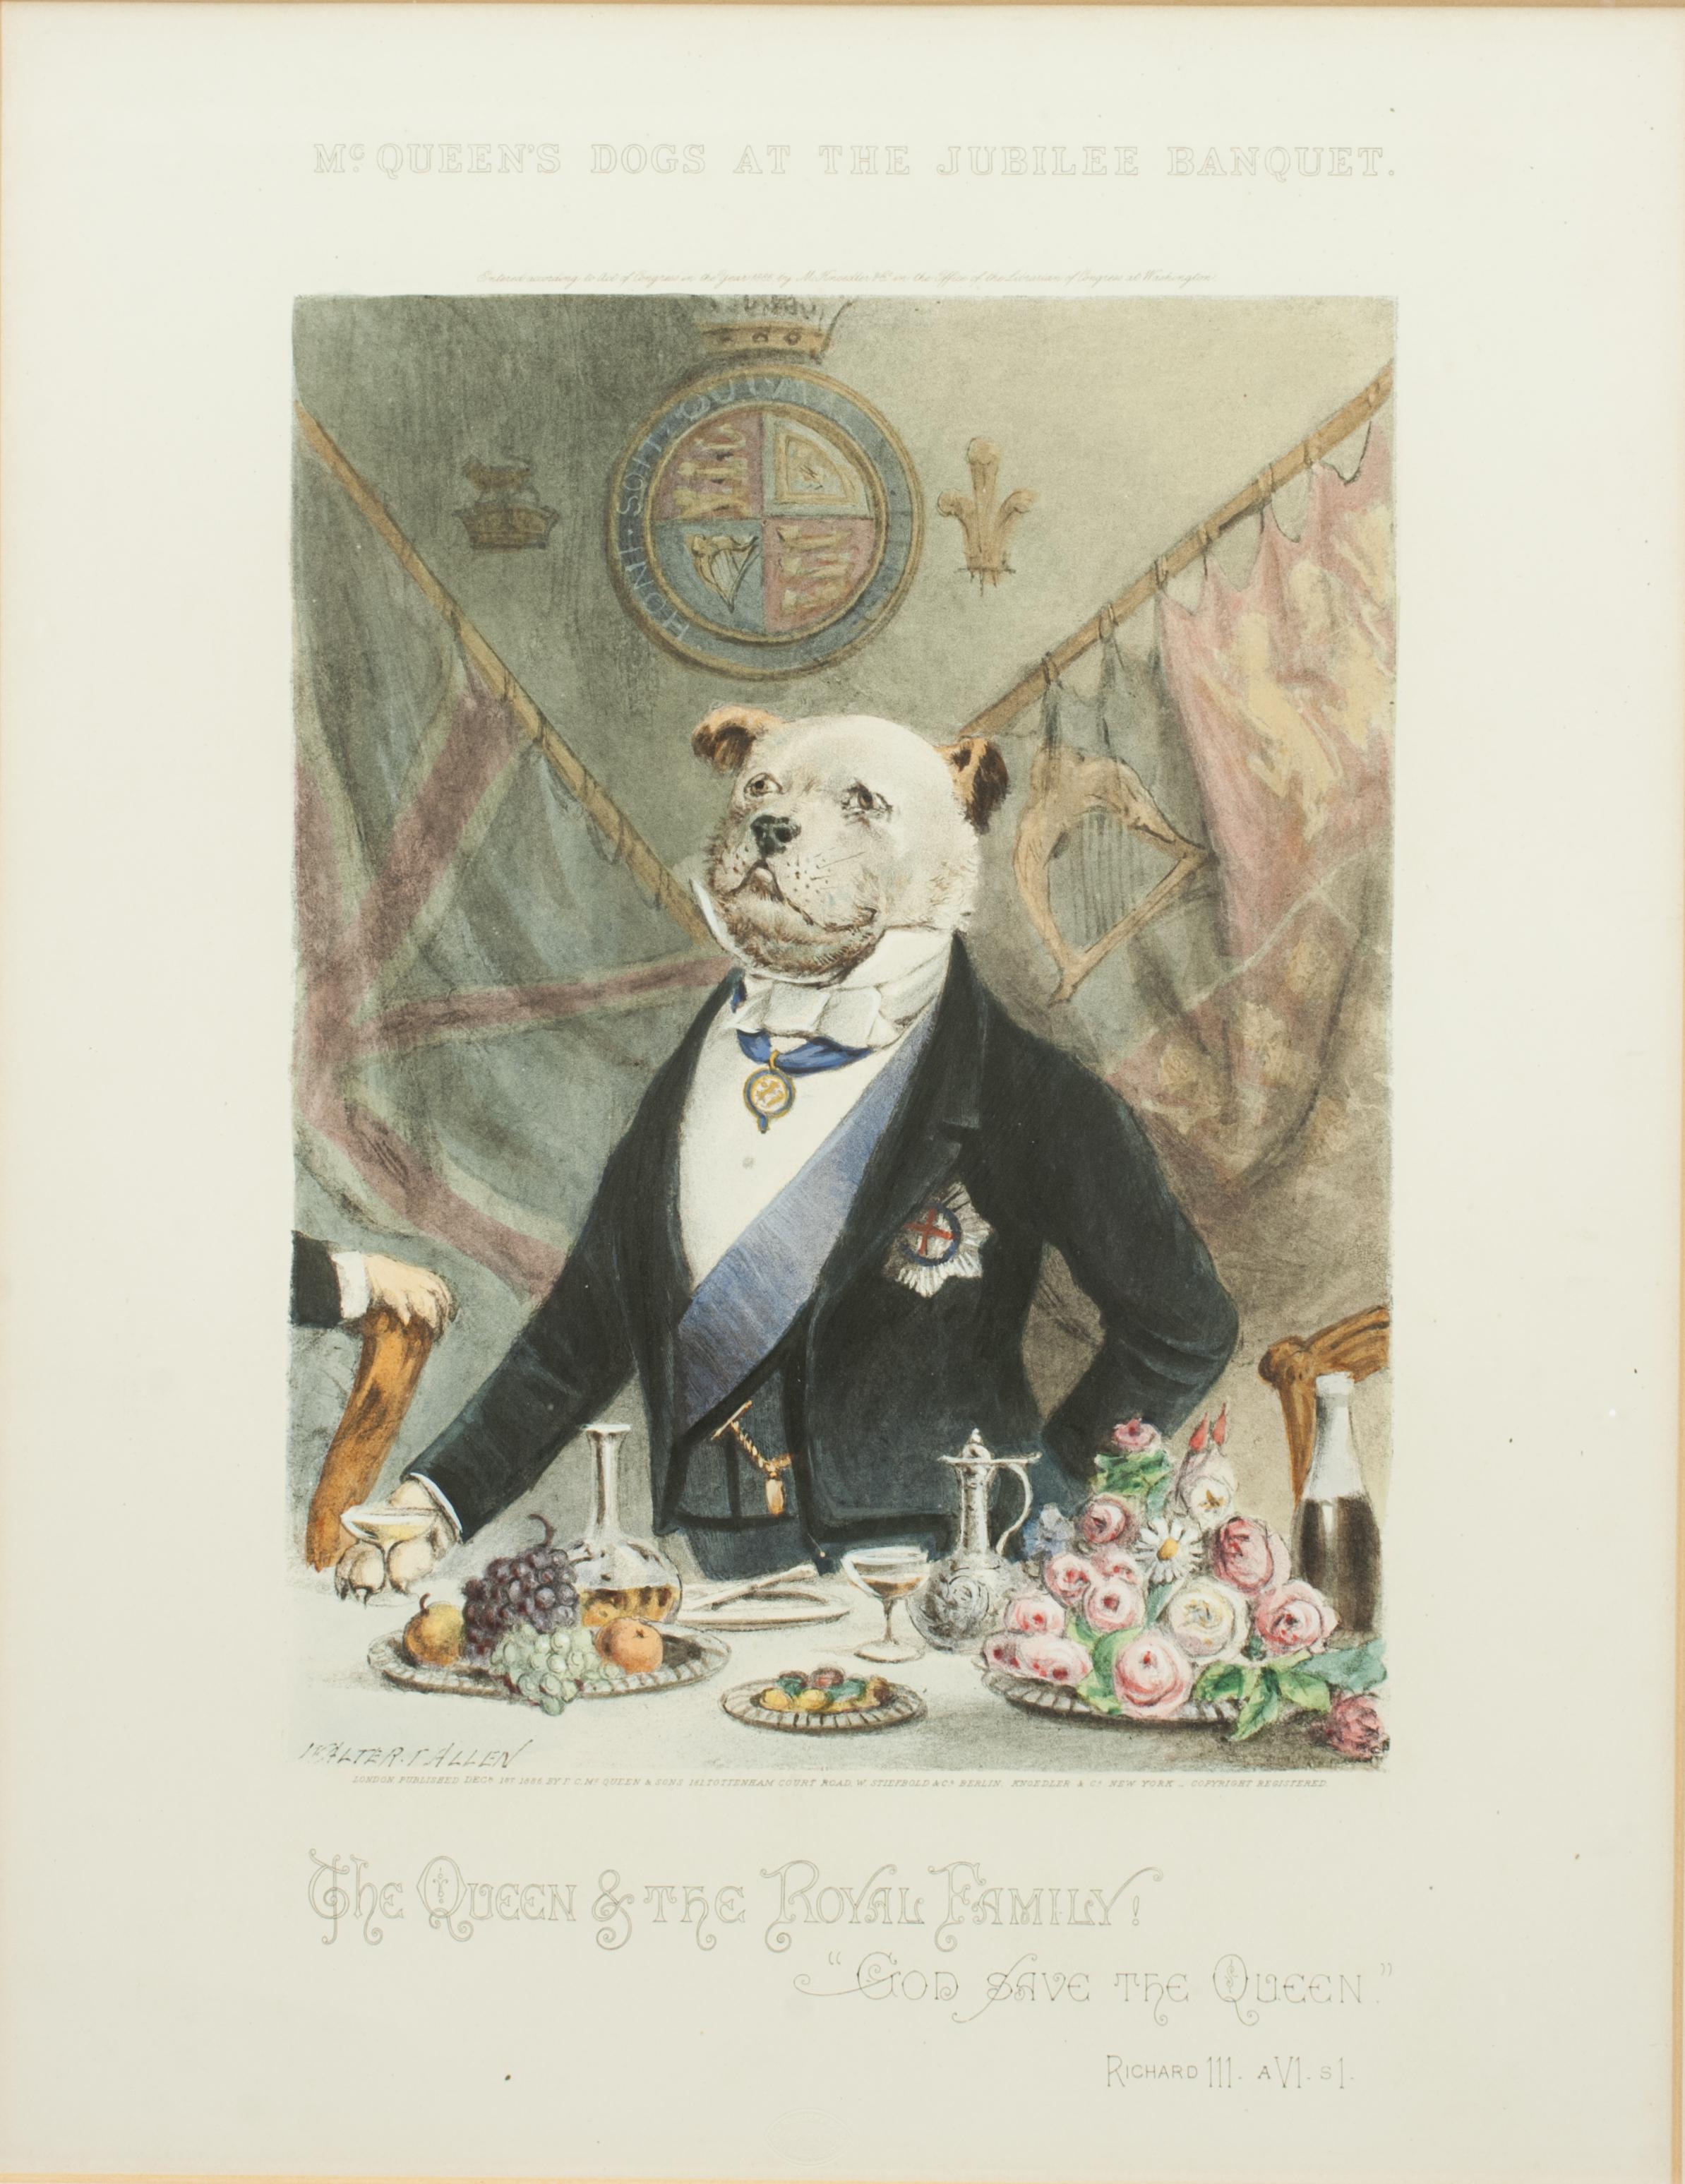 Late 19th Century McQueen's Dogs at Queen Victoria's Golden Jubilee Banquet